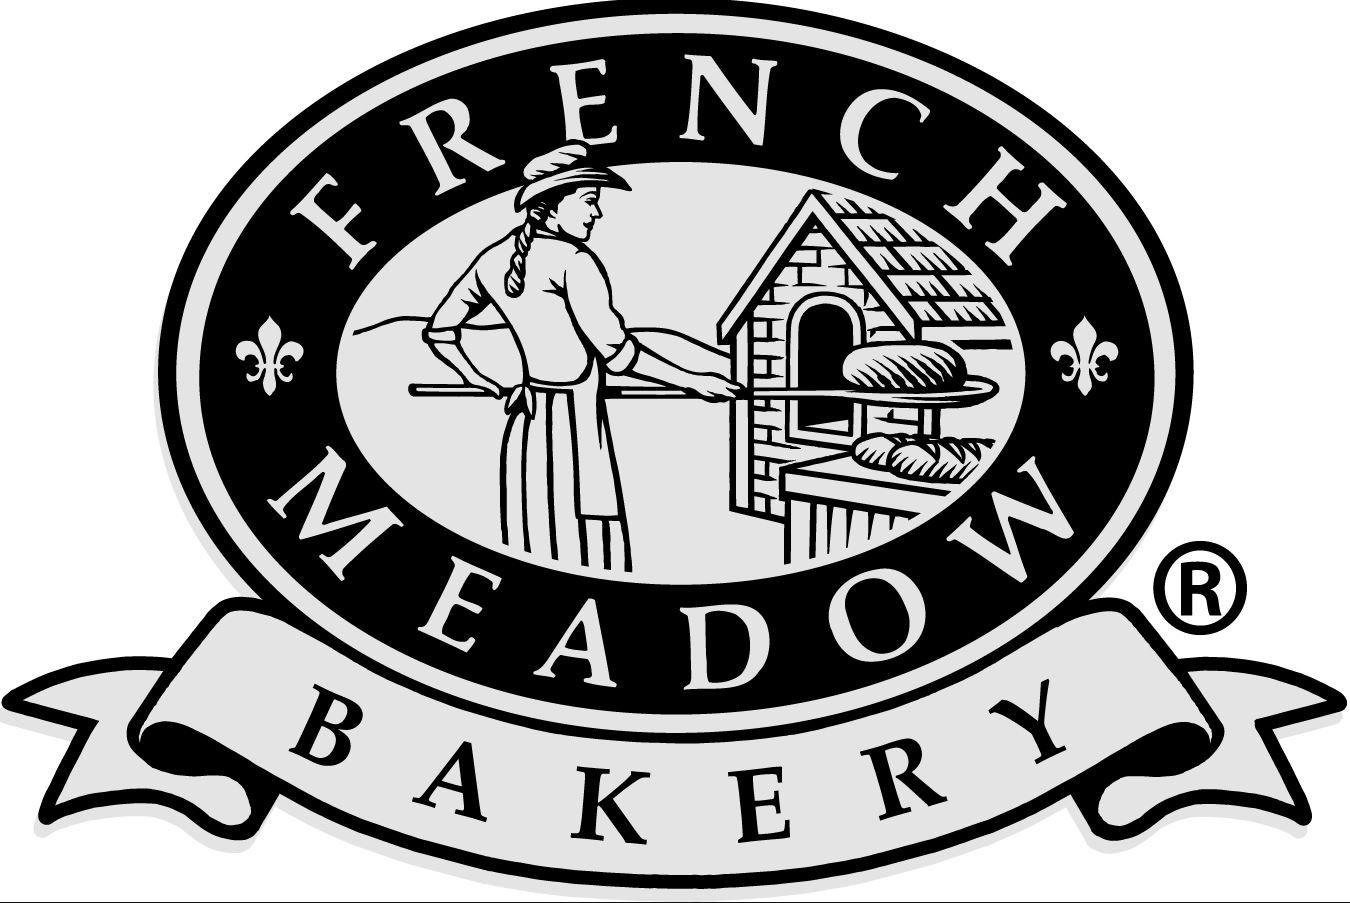 Black K and Y Logo - File:French Meadow Bakery logo.JPG